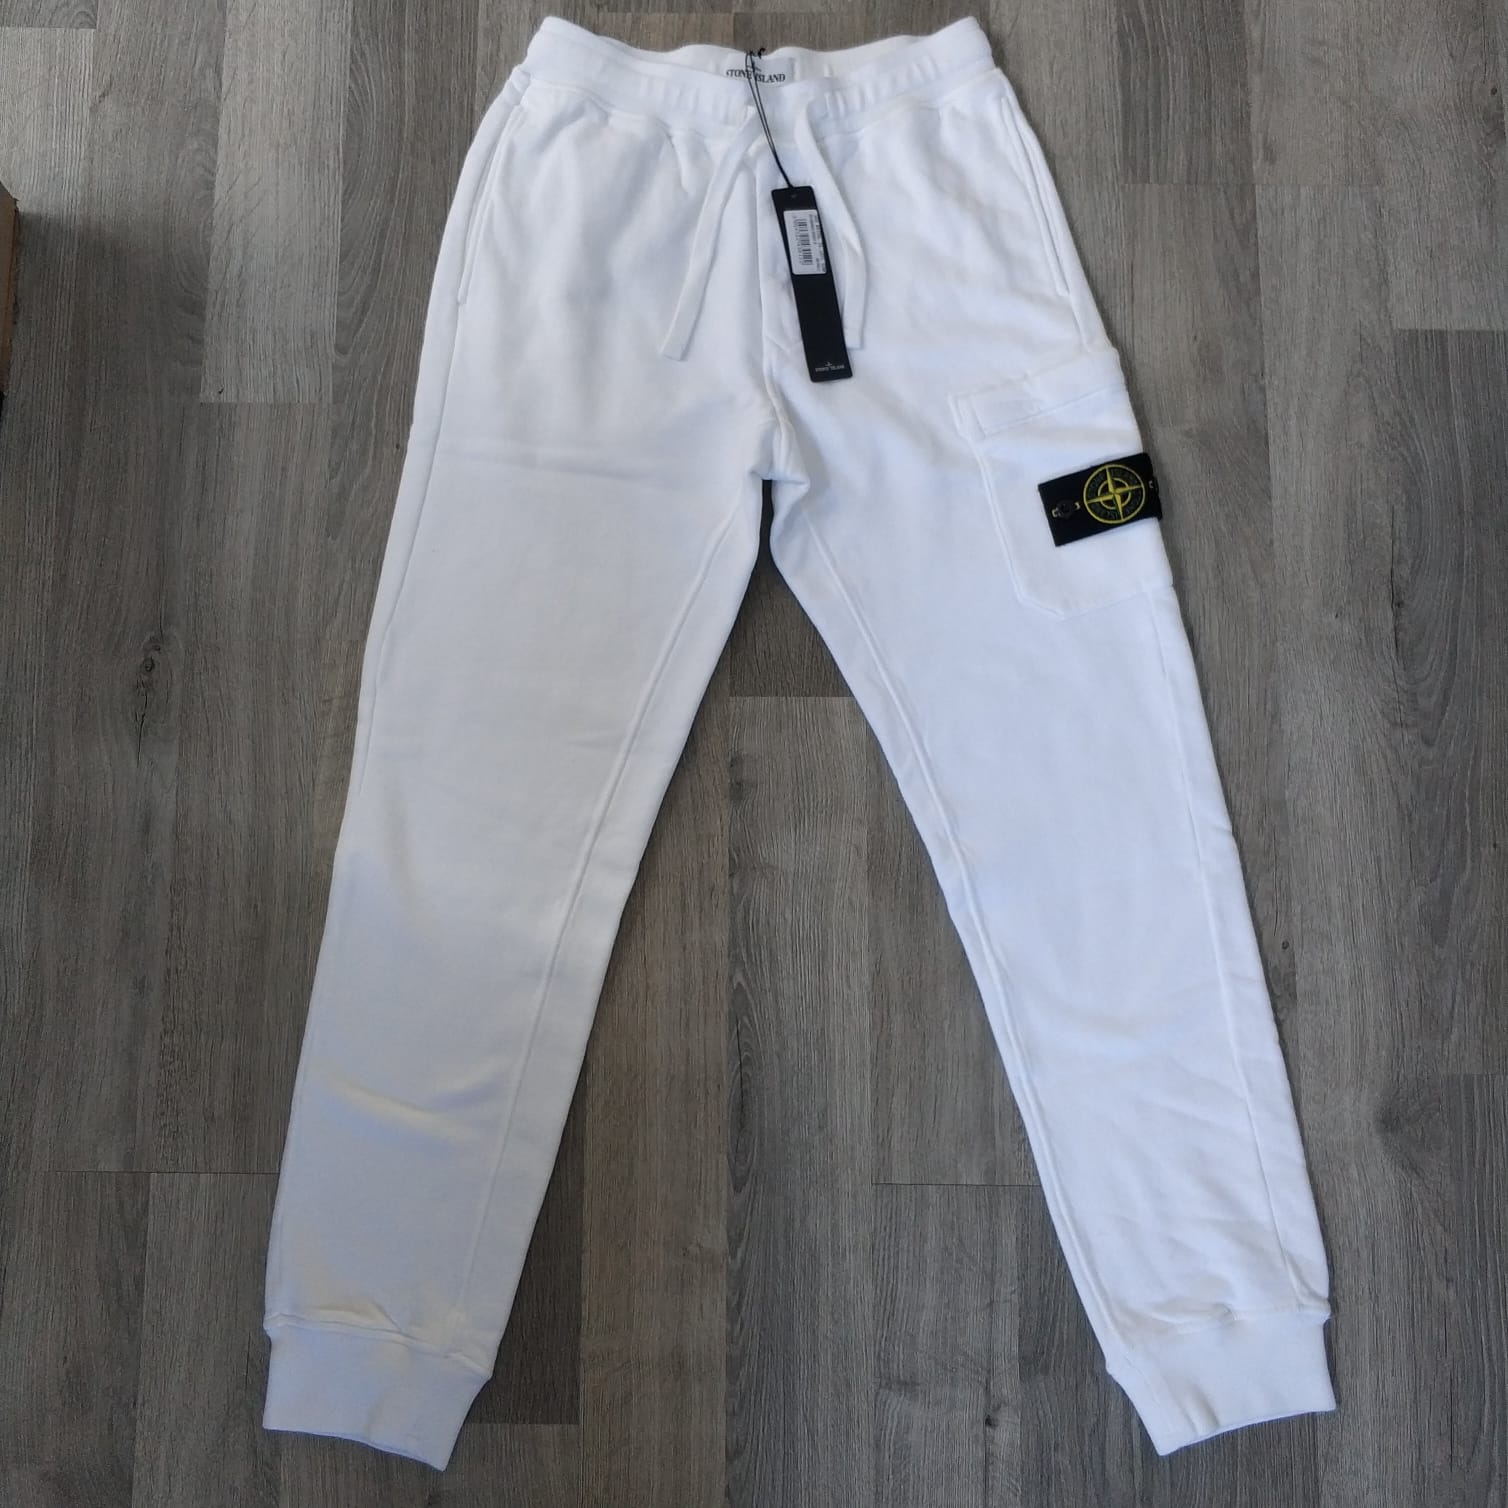 STONE ISLAND FLEECE PANTS TROUSERS WITH PATCH   WHITE   London